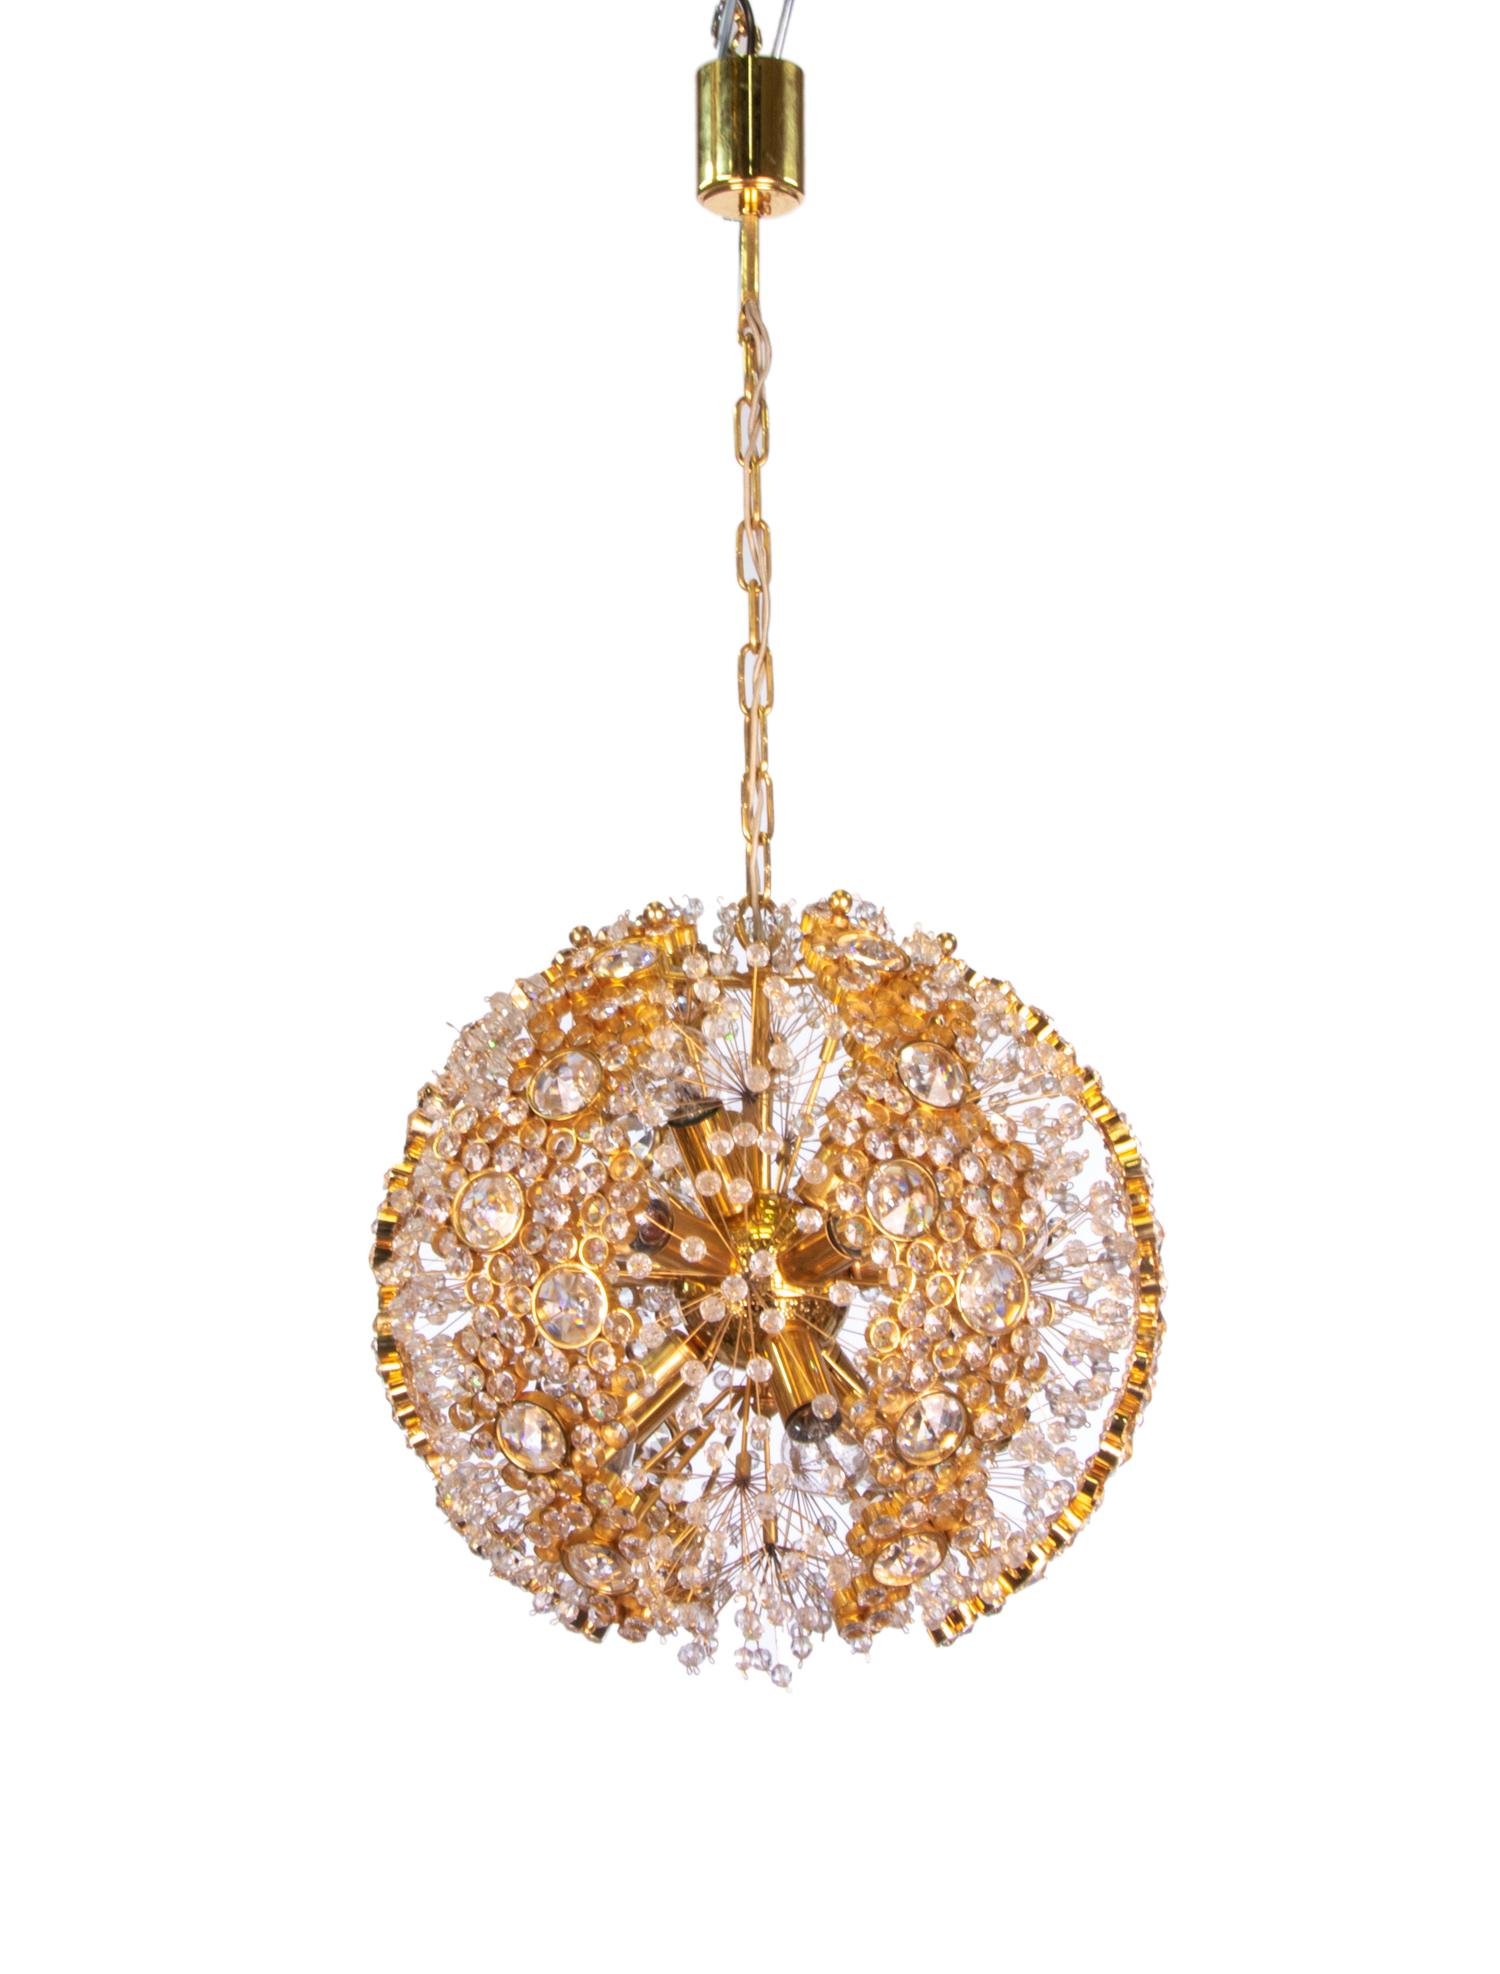 Enchanting sunburst ball chandelier with sparkling stars for infinity. Swarovski crystals placed on gold-plated sun rays explode between pulsating sun discs studded with crystals of different sizes mounted on a 14-karat gold-plated brass frame. Has